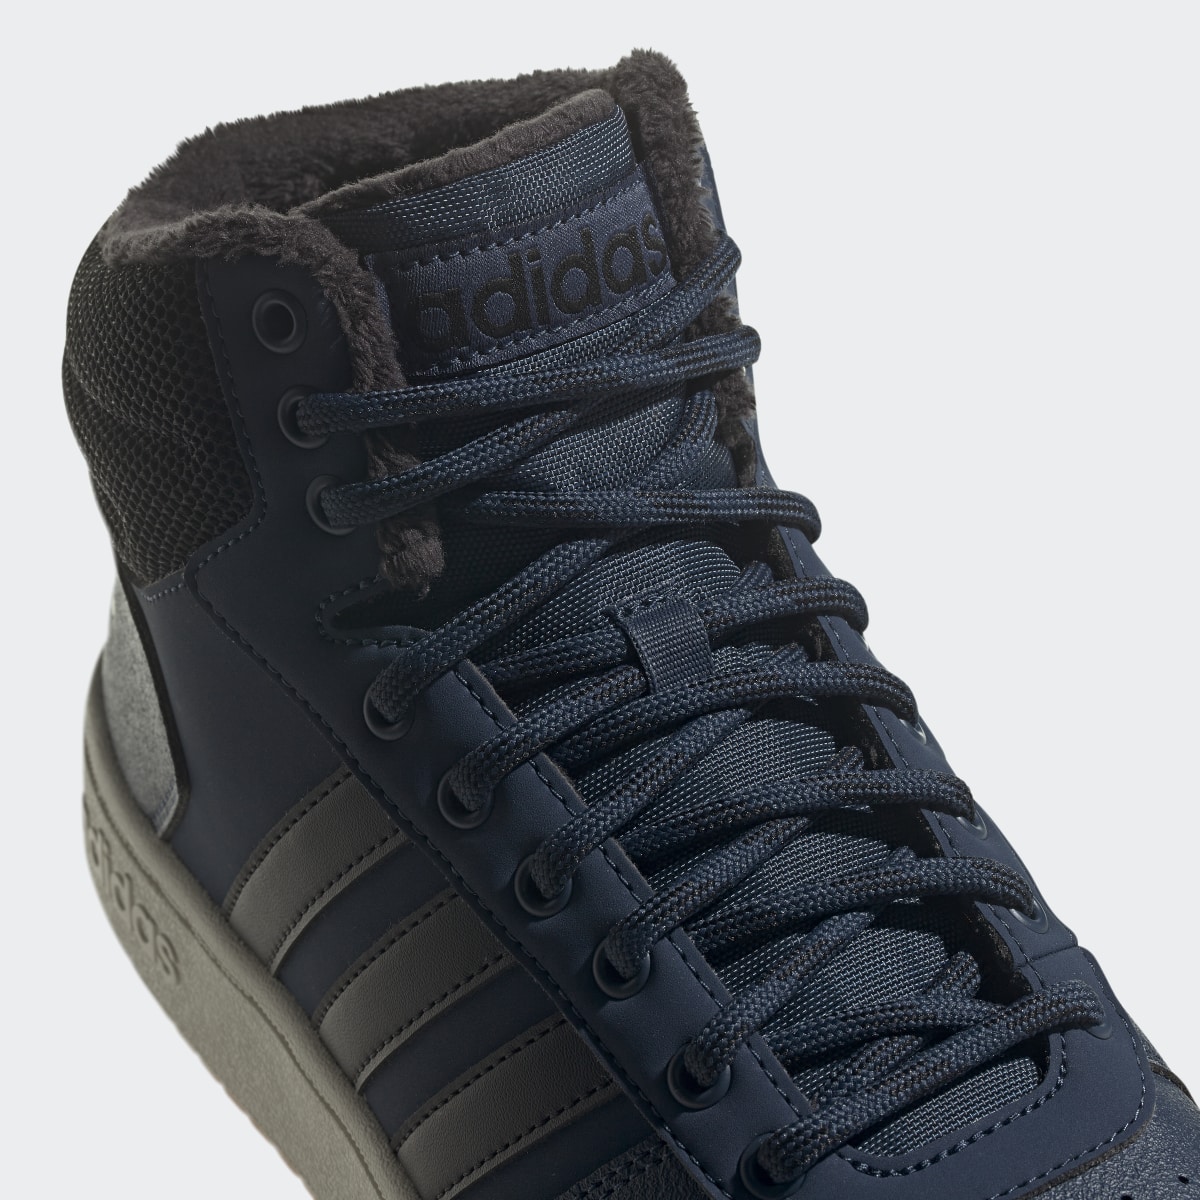 Adidas Chaussure Hoops 2.0 Mid. 8